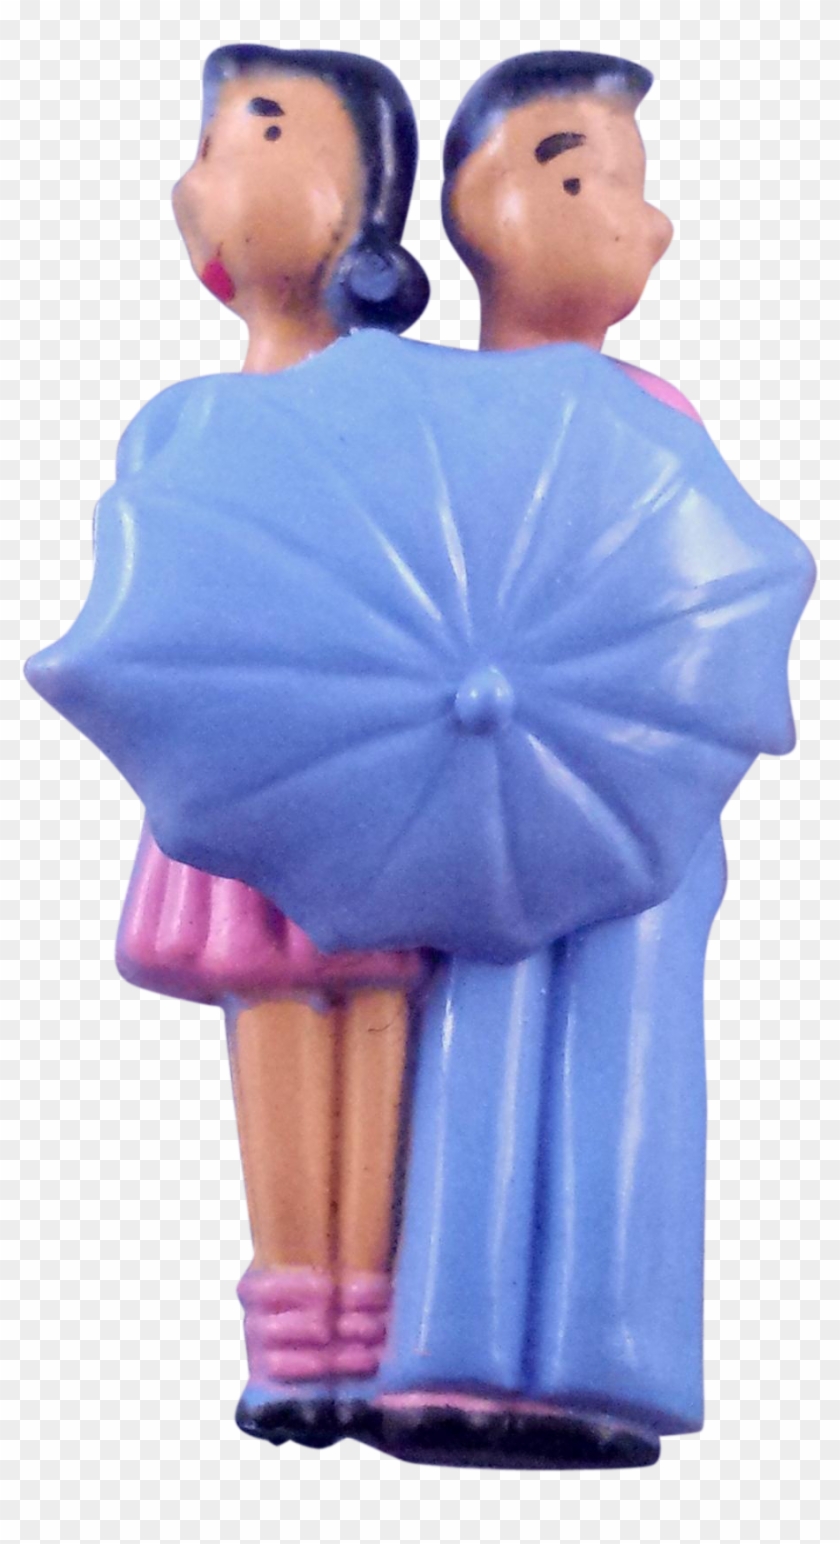 Bashful Courting Boy And Girl With Twirling Umbrella - Figurine #926959